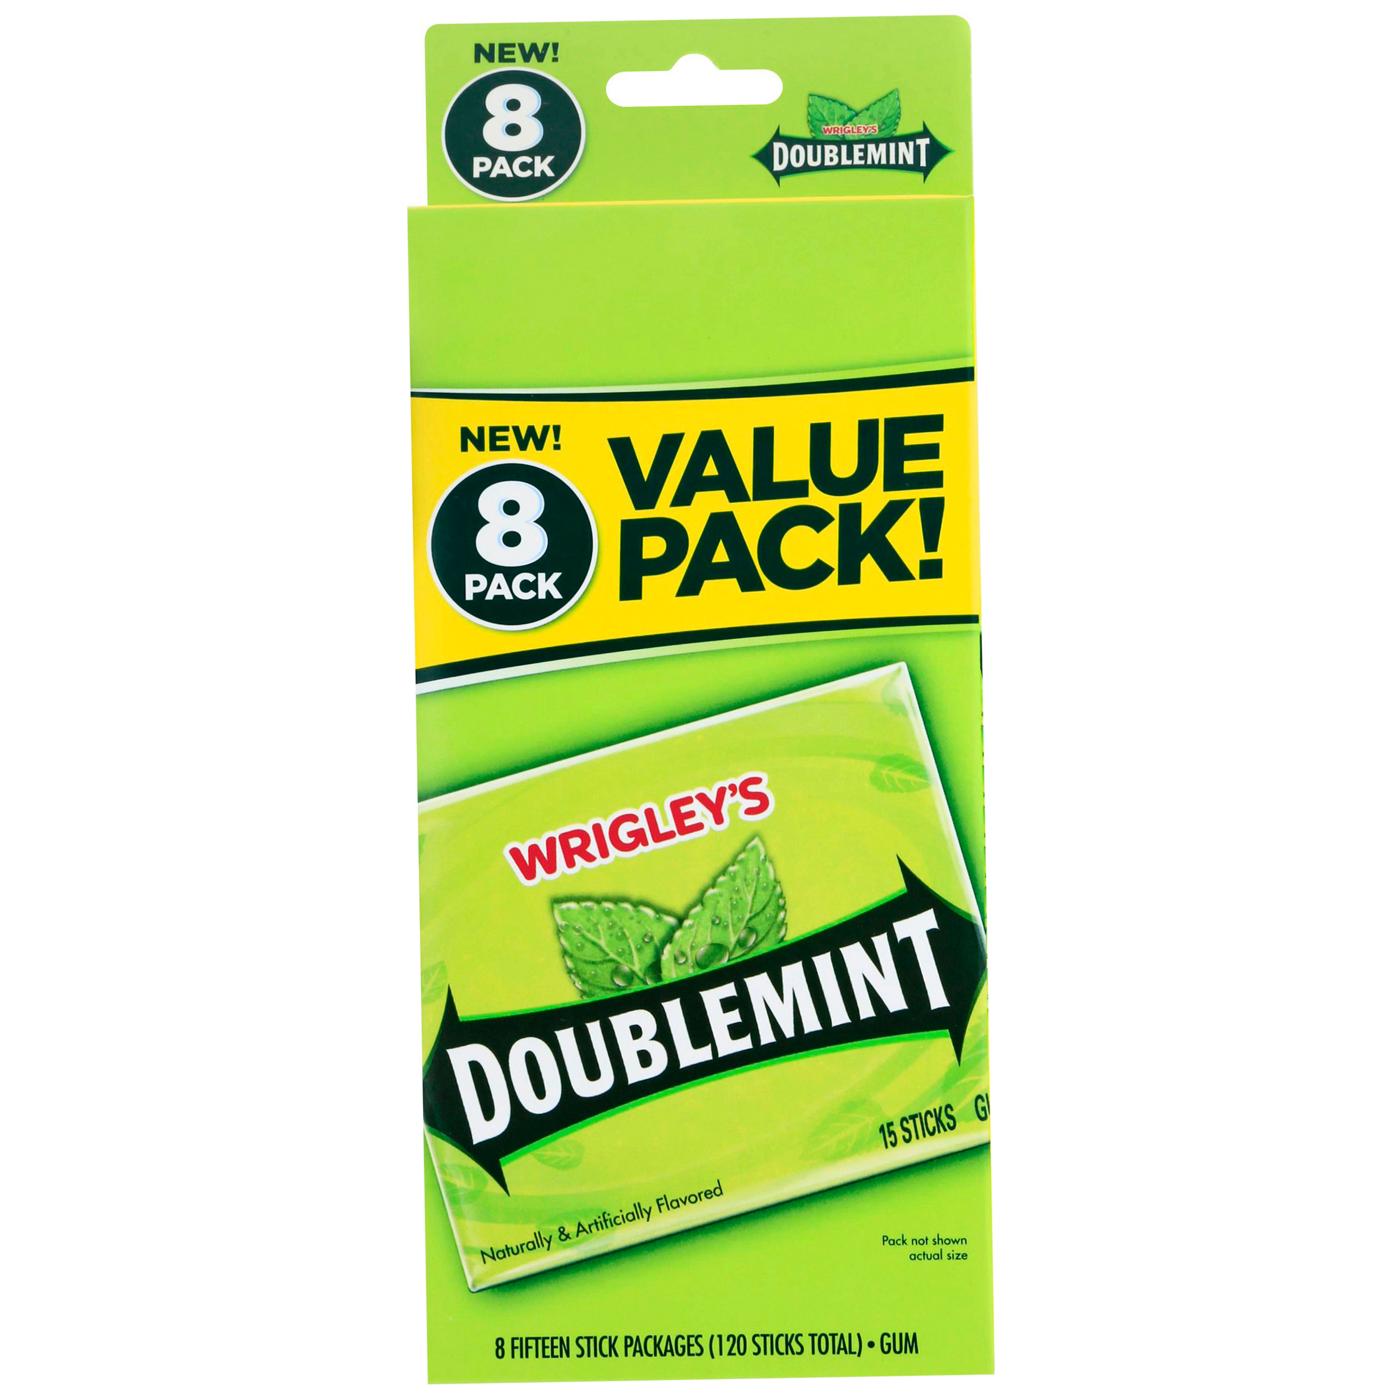 Wrigley's Doublemint Chewing Gum Value Pack, 8 Pk; image 1 of 6